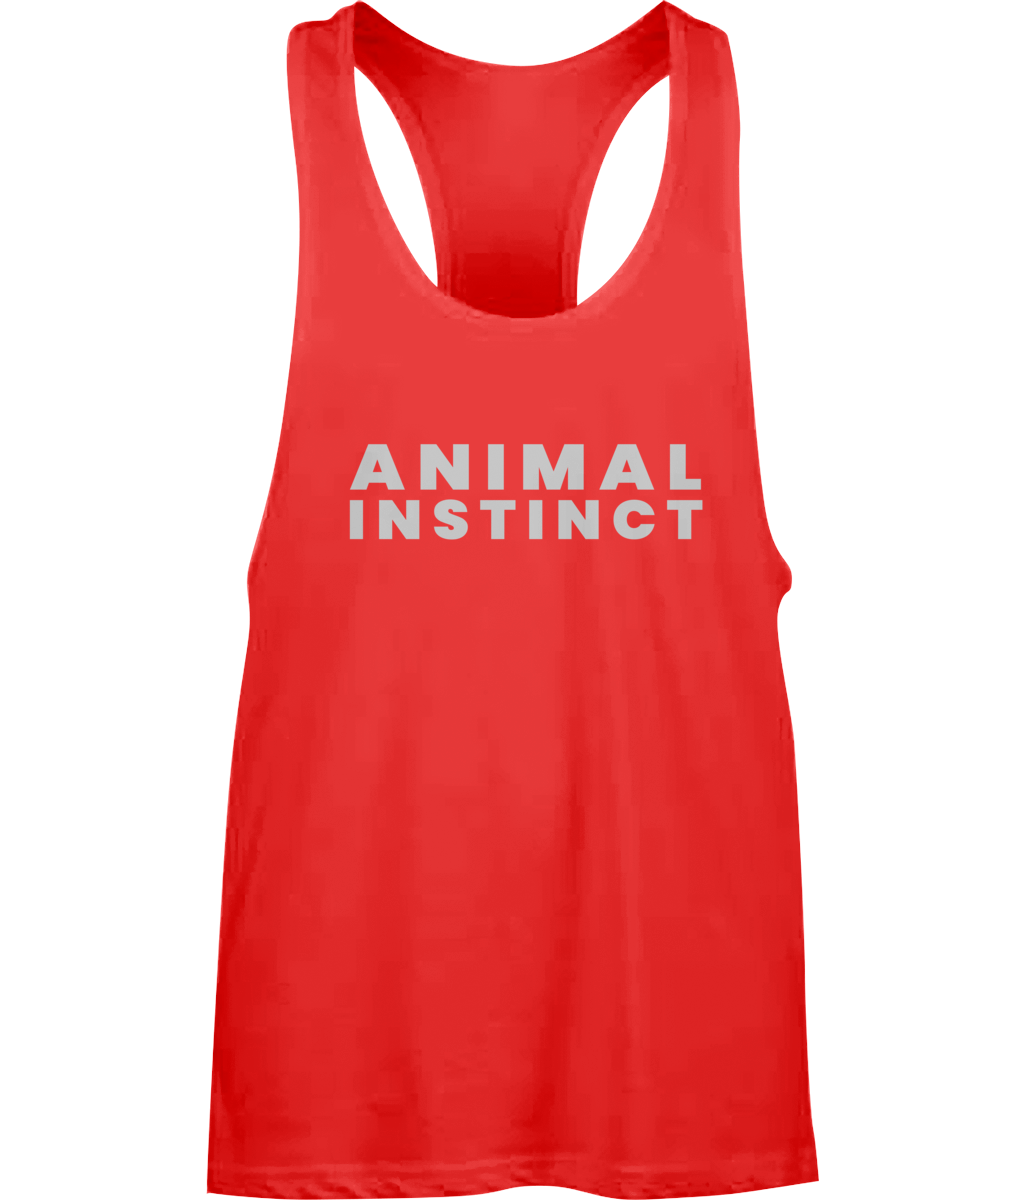 Mens Red Workout Hardcore Muscle Vest with large thick Animal Instinct font across the chest